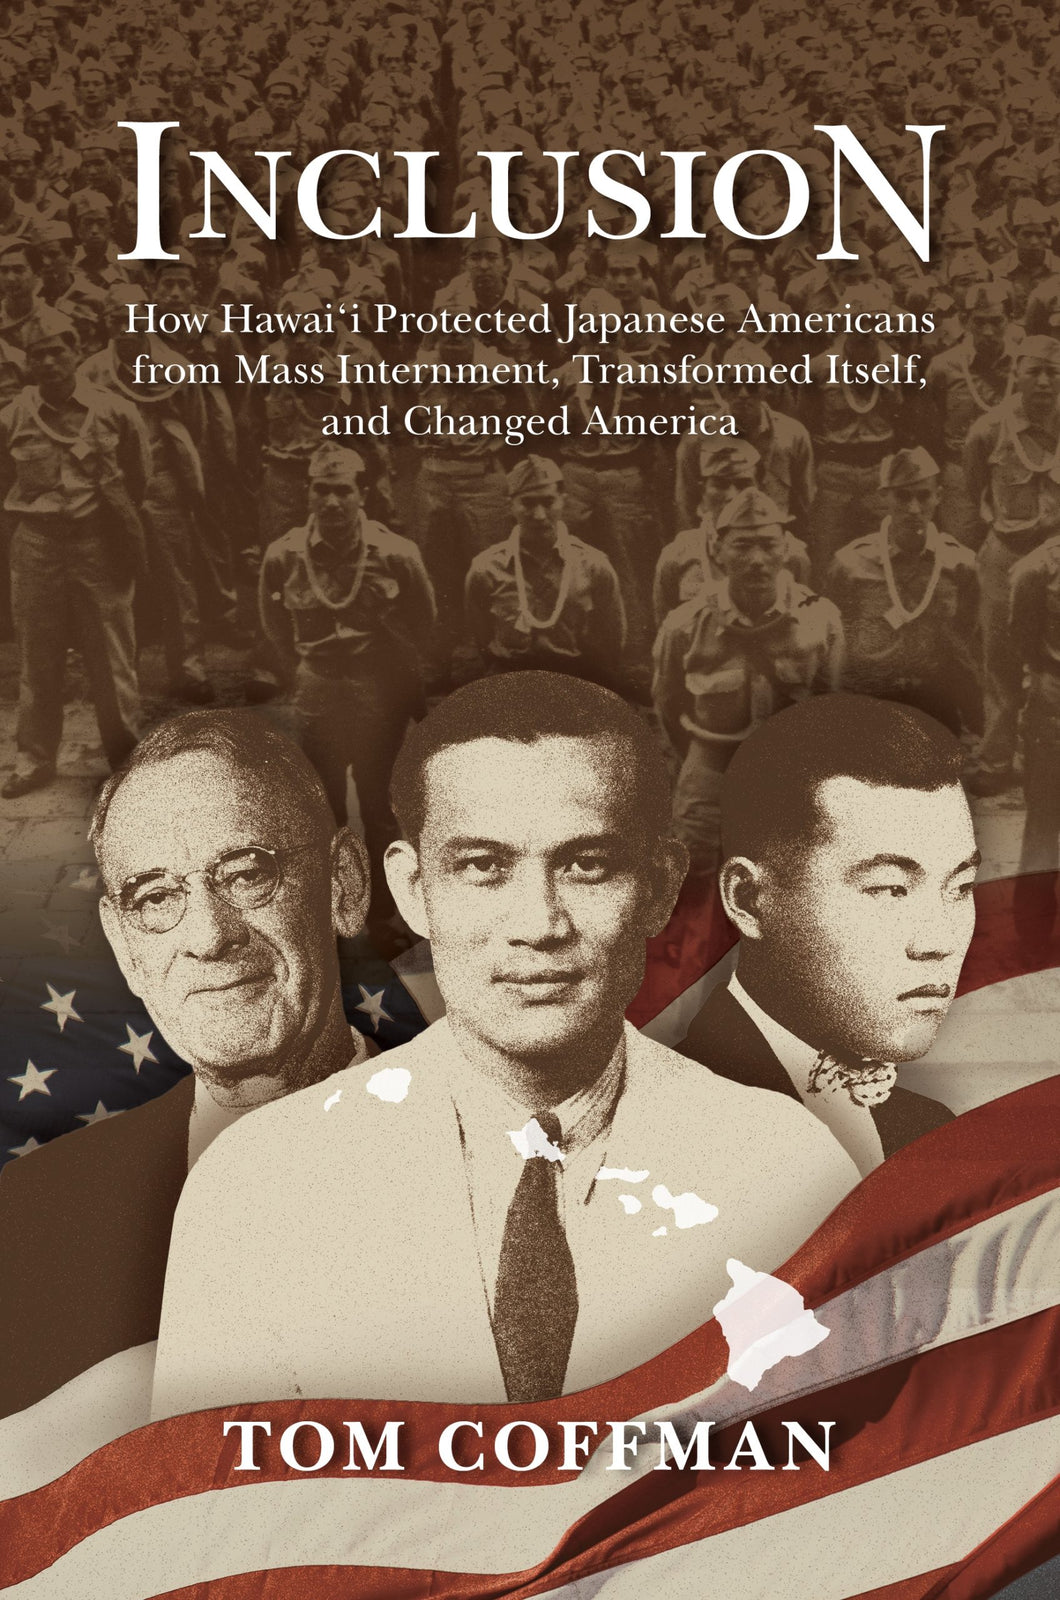 INCLUSION: How Hawaii Protected Japanese Americans by Tom Coffman